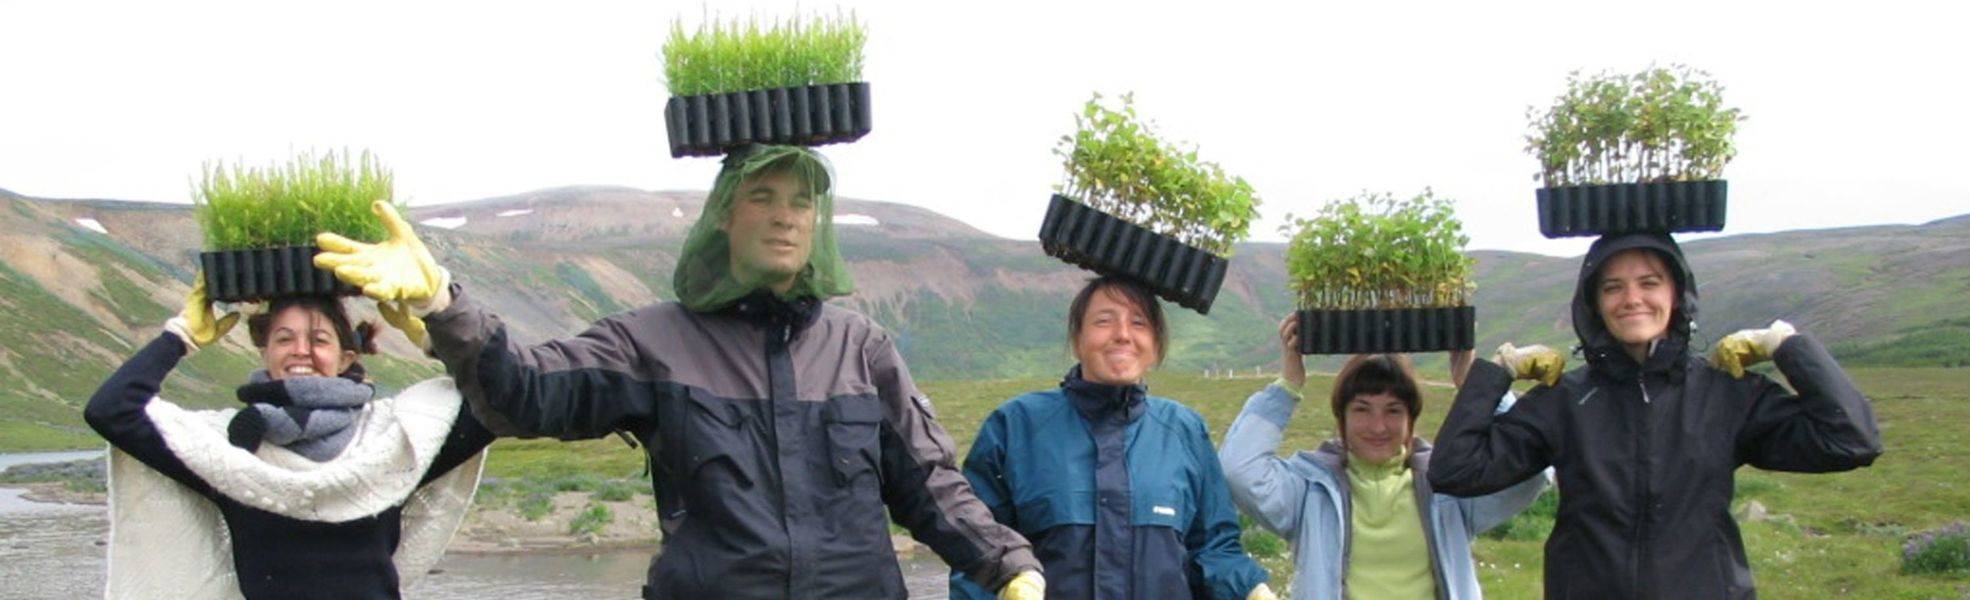 Volunteers do voluntary work in the field of environment and climate